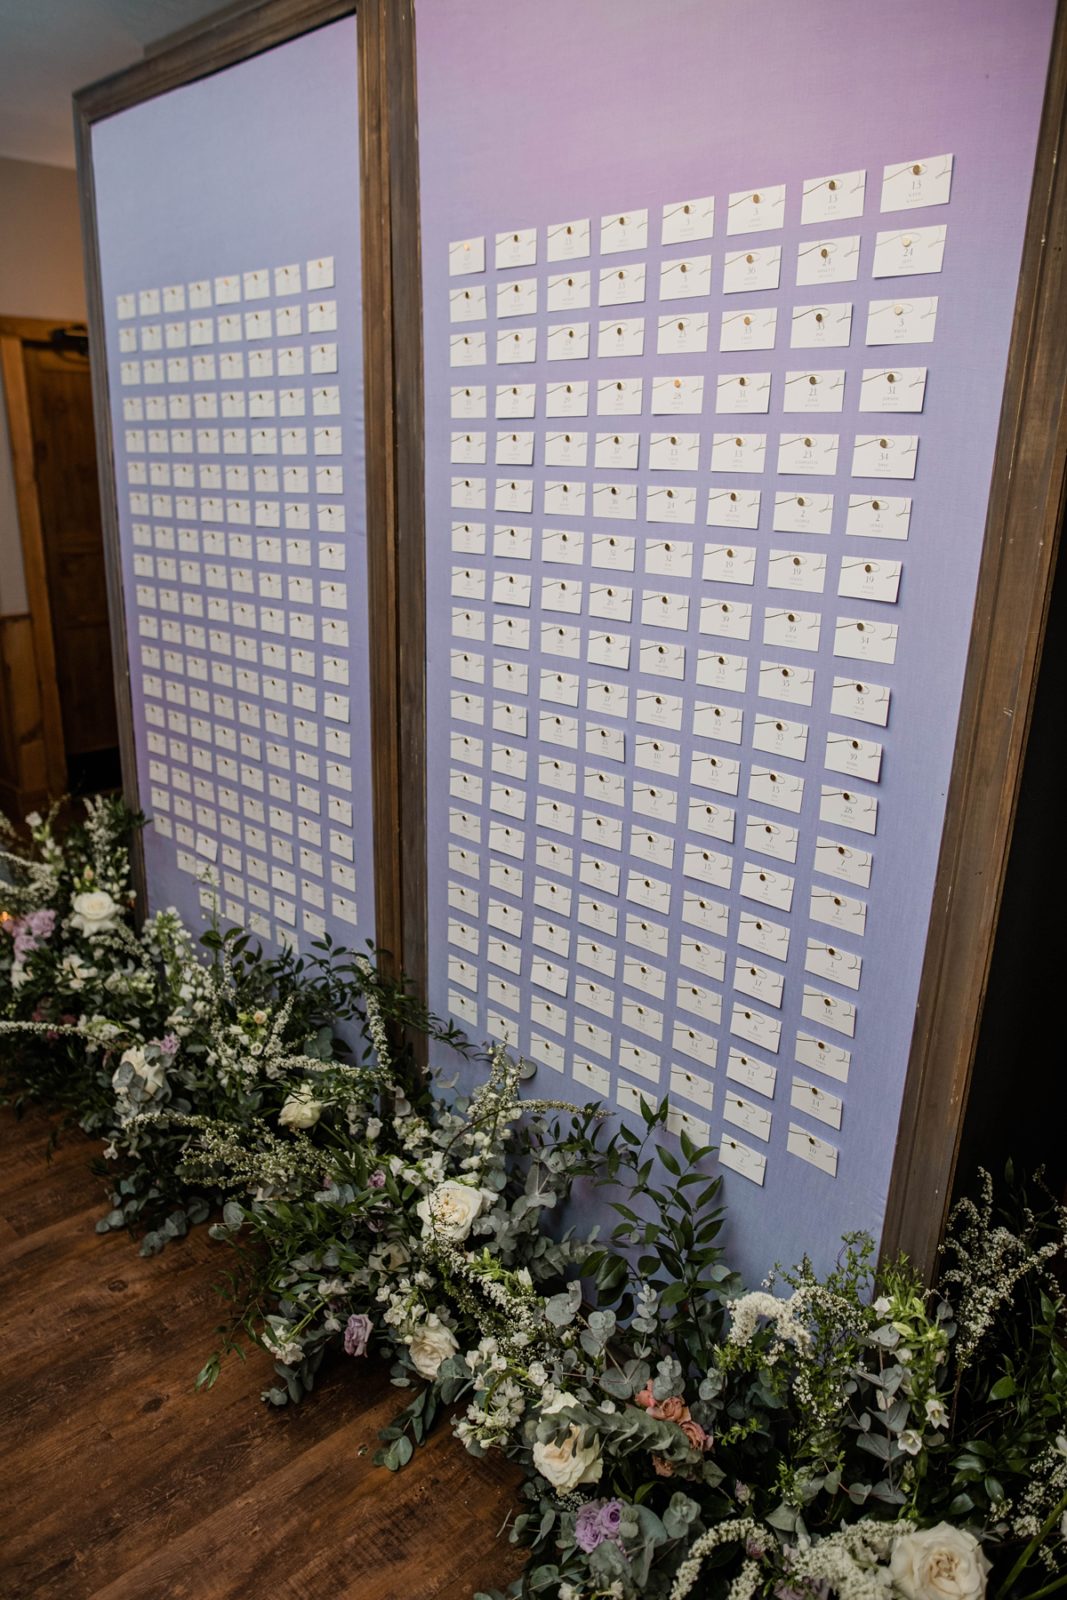 Purple wedding reception guest seating chart.